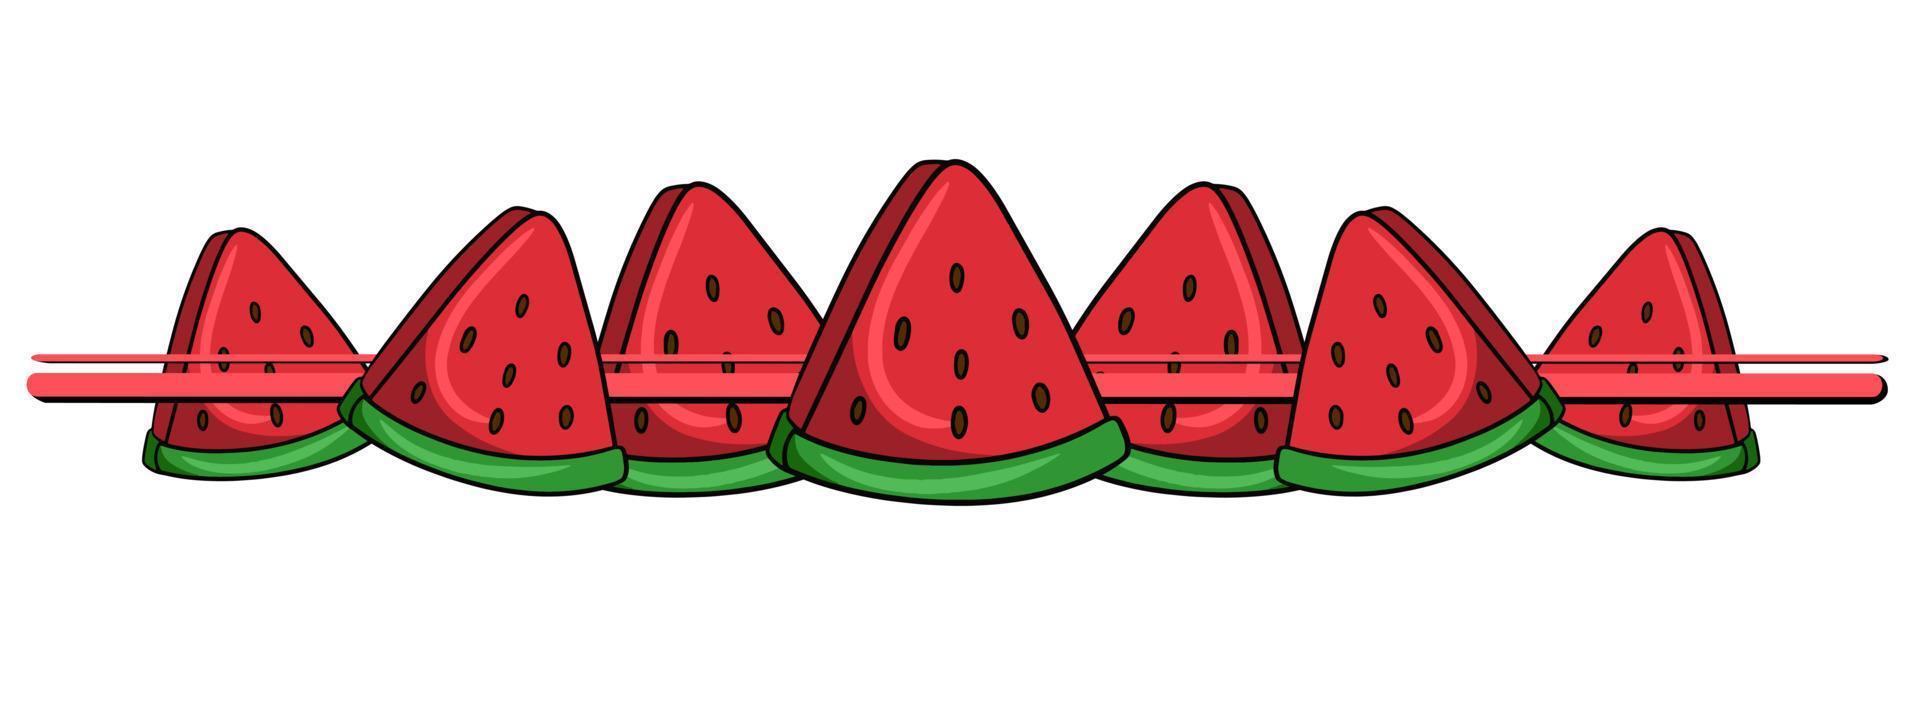 Horizontal border, edge, juicy red pieces of watermelon, vector illustration in cartoon style on a white background